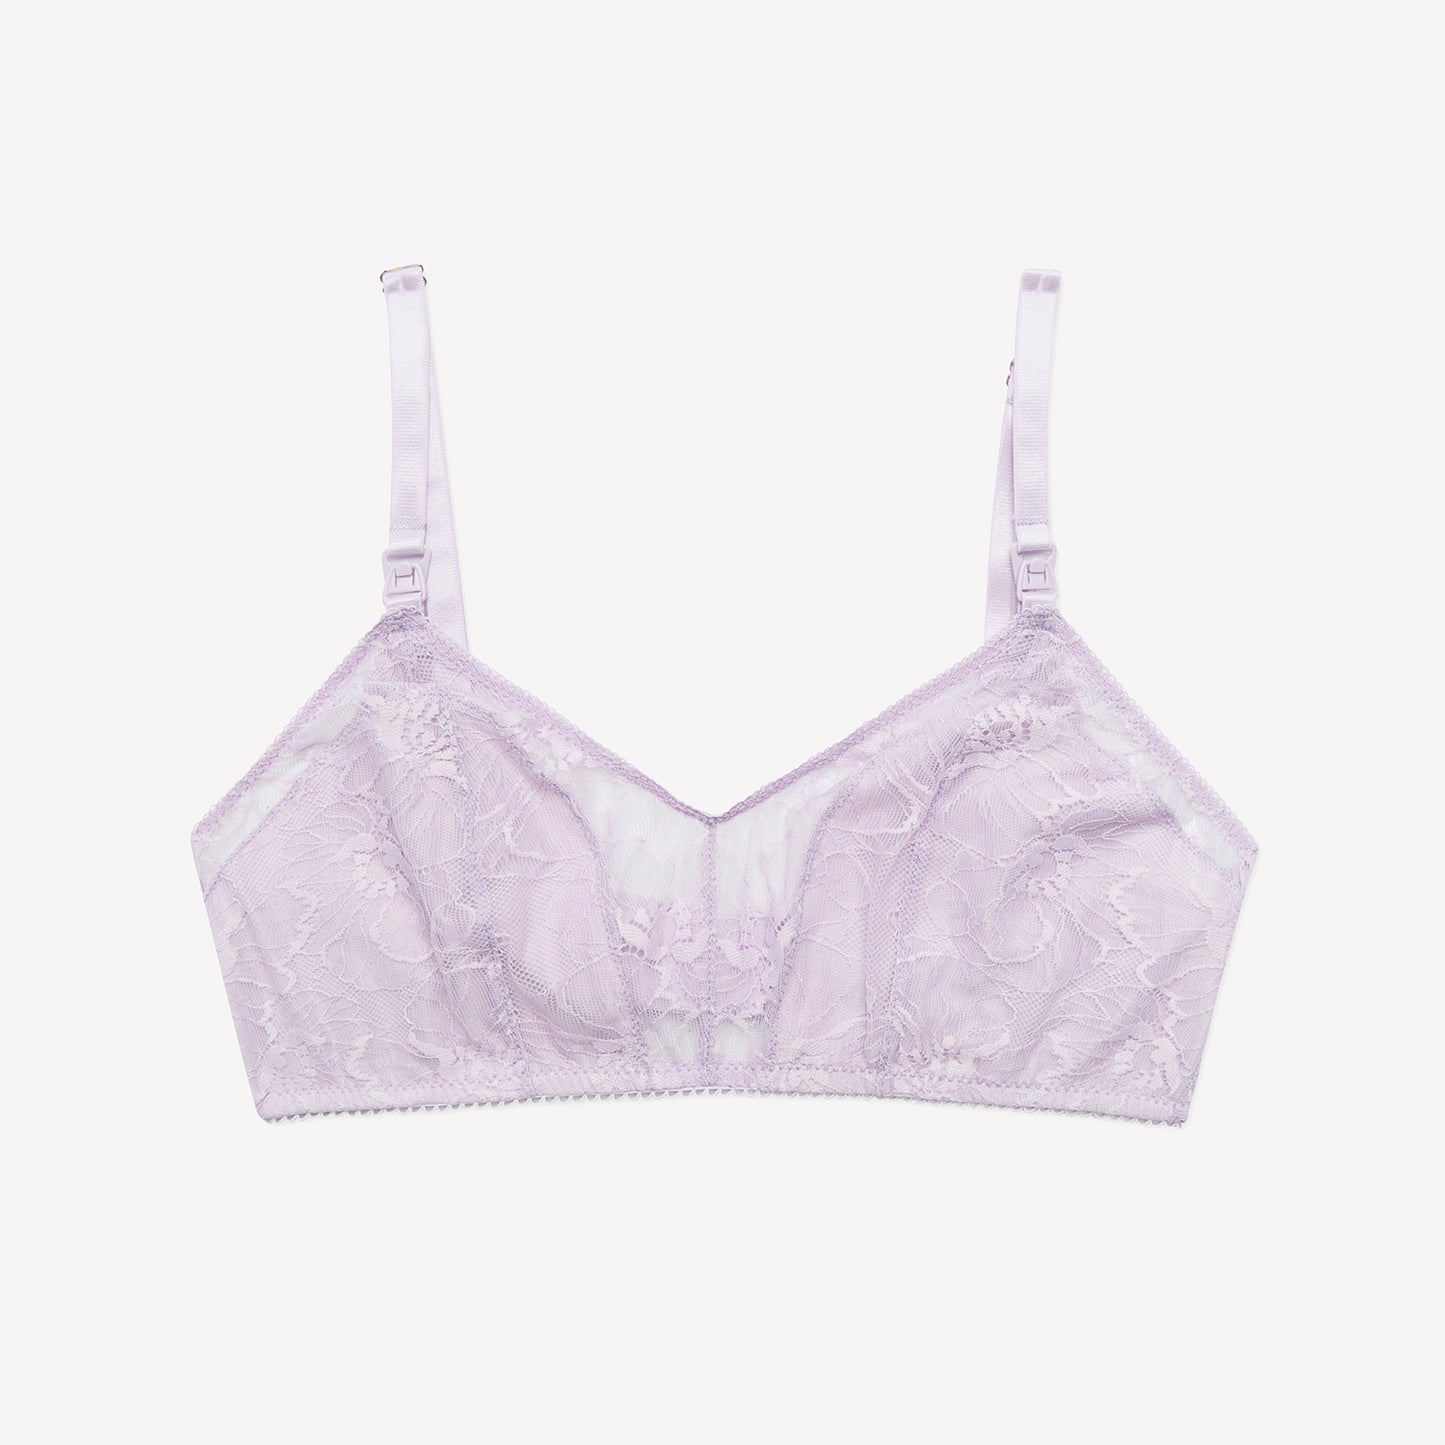 Lilac Lace Soft and Supportive Full Coverage Nursing Bra for Easy Breastfeeding, Designed in Byron Bay Australia